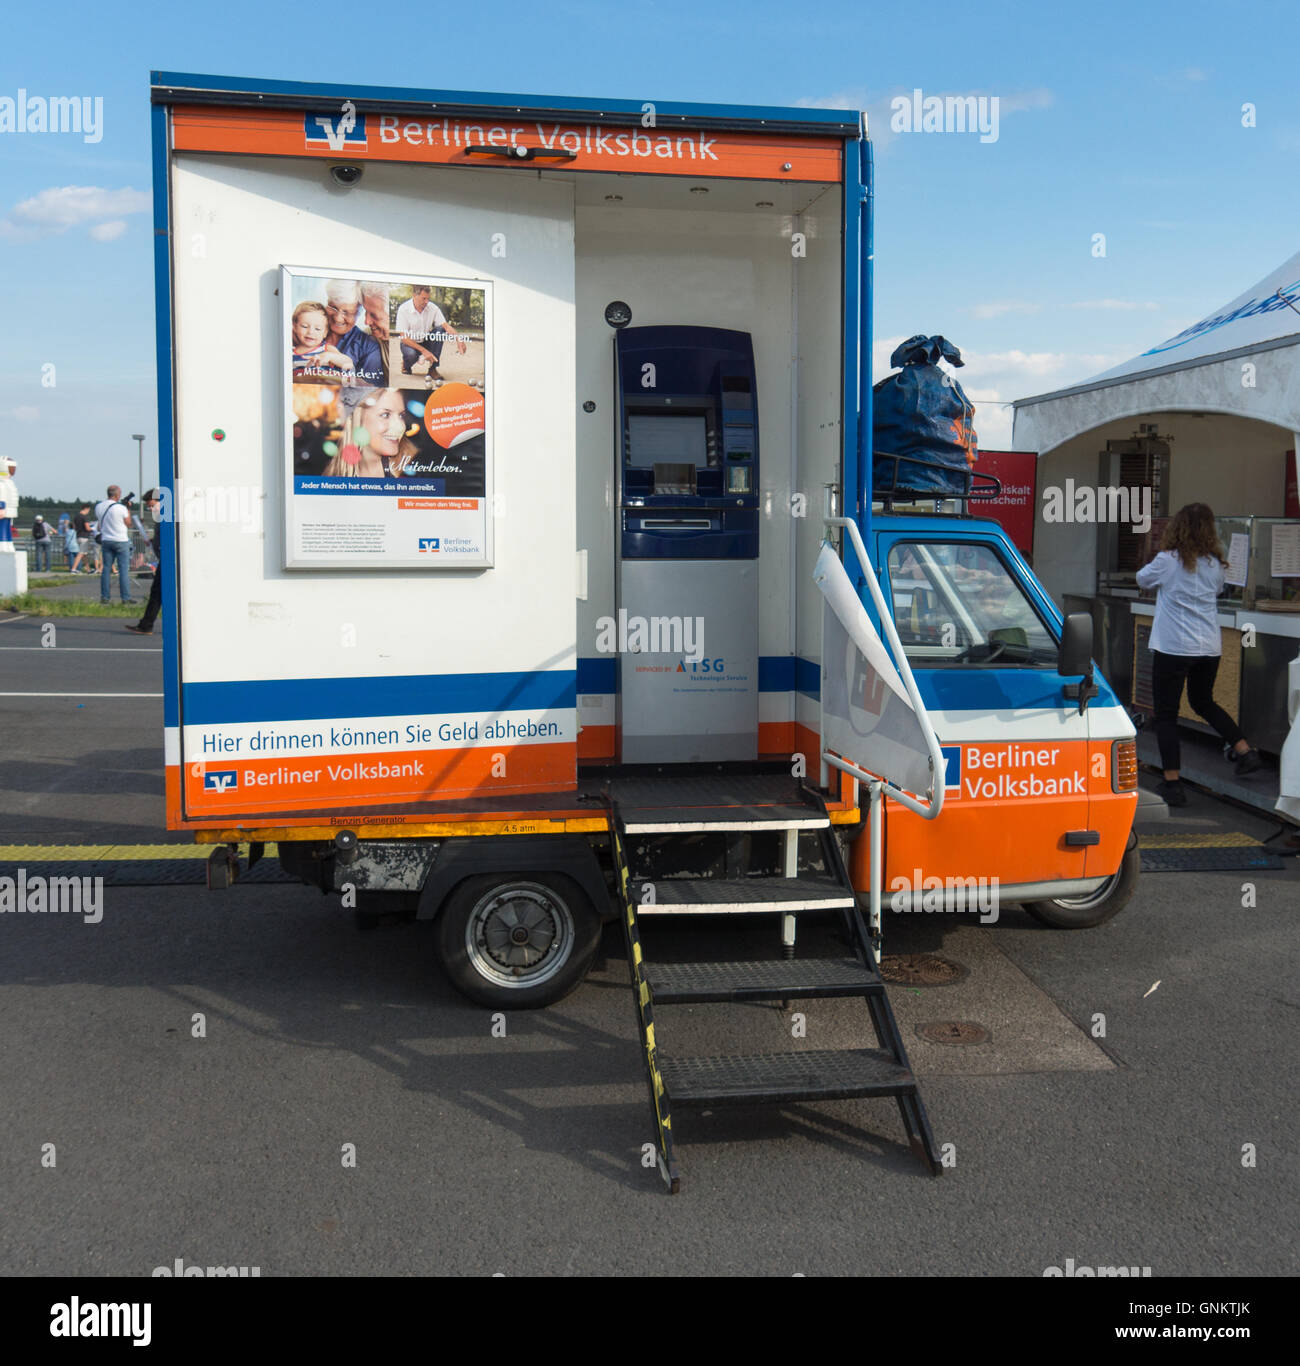 BERLIN, GERMANY - JUNE 03, 2016: Mobile ATM of the bank 'Berliner Volksbank' on the basis of car Piaggio Ape. Stock Photo